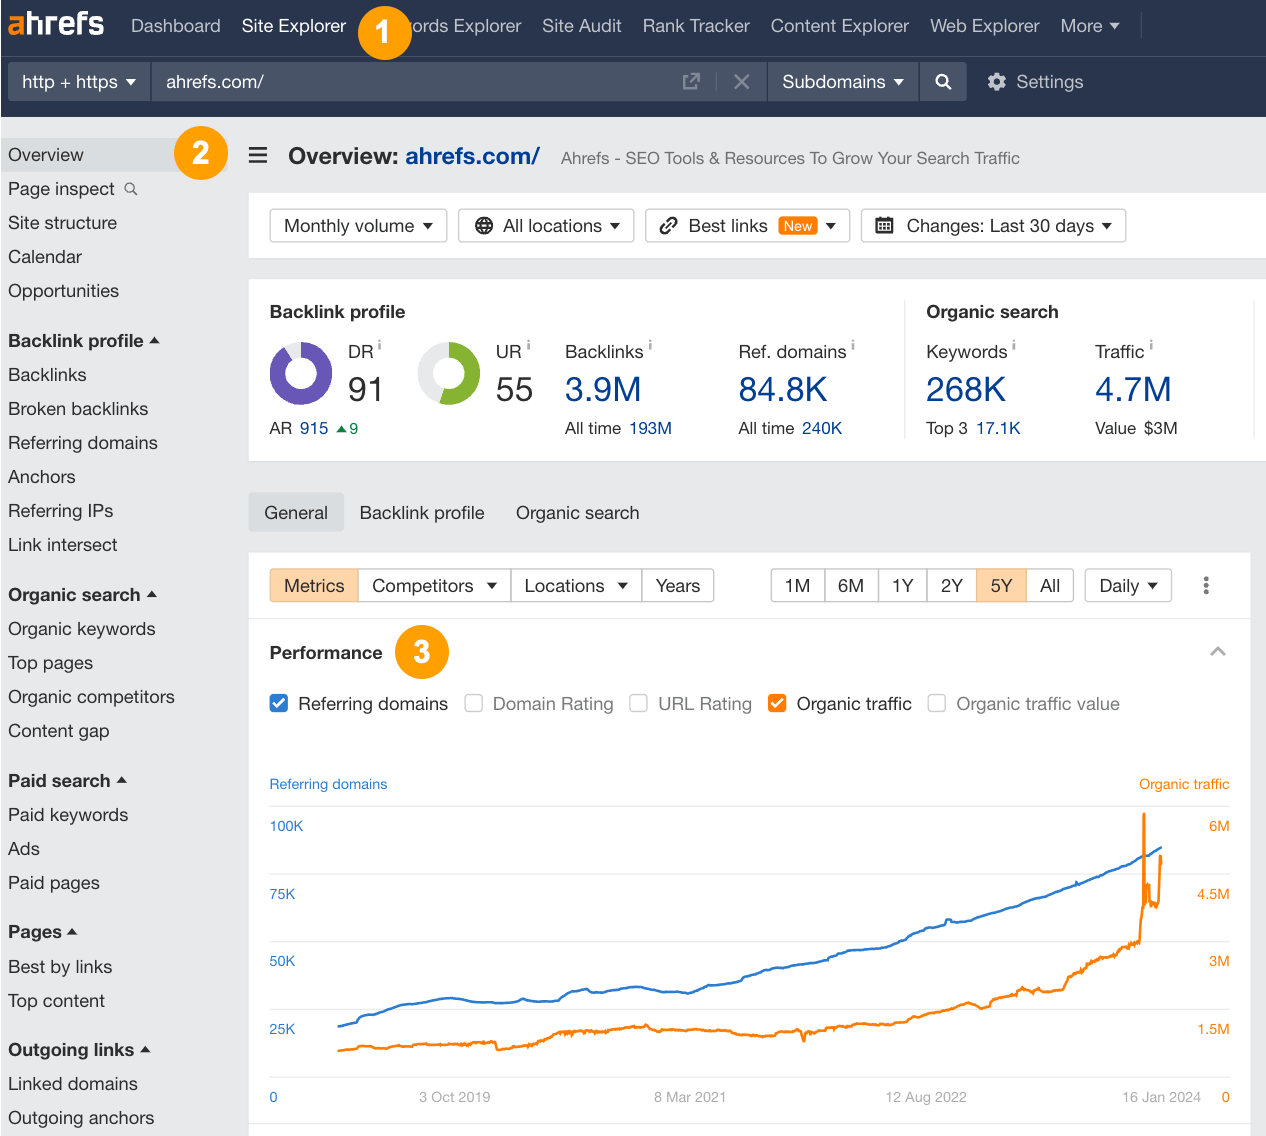 Filtering Ahrefs' Site Explorer performance graph by referring domains and organic traffic